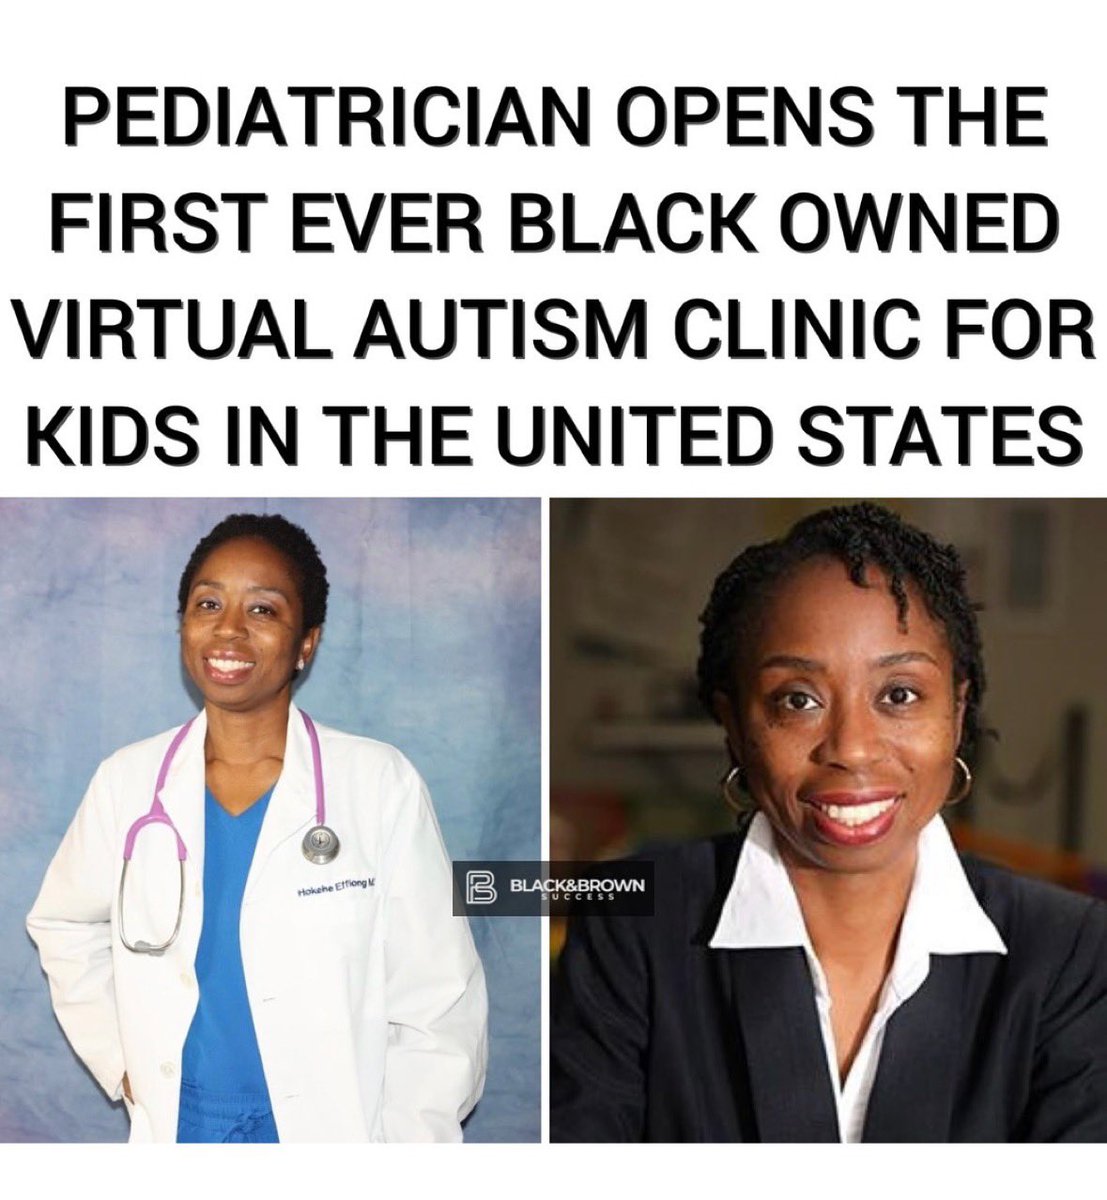 Dr. Hokehe Eko is a Board-Certified Pediatrician, Integrative Medicine specialist, and mother of 3, is also the Founder and CEO of Glow Pediatrics @glowpediatrics the first Black-owned virtual autism clinic for kids in the United States.